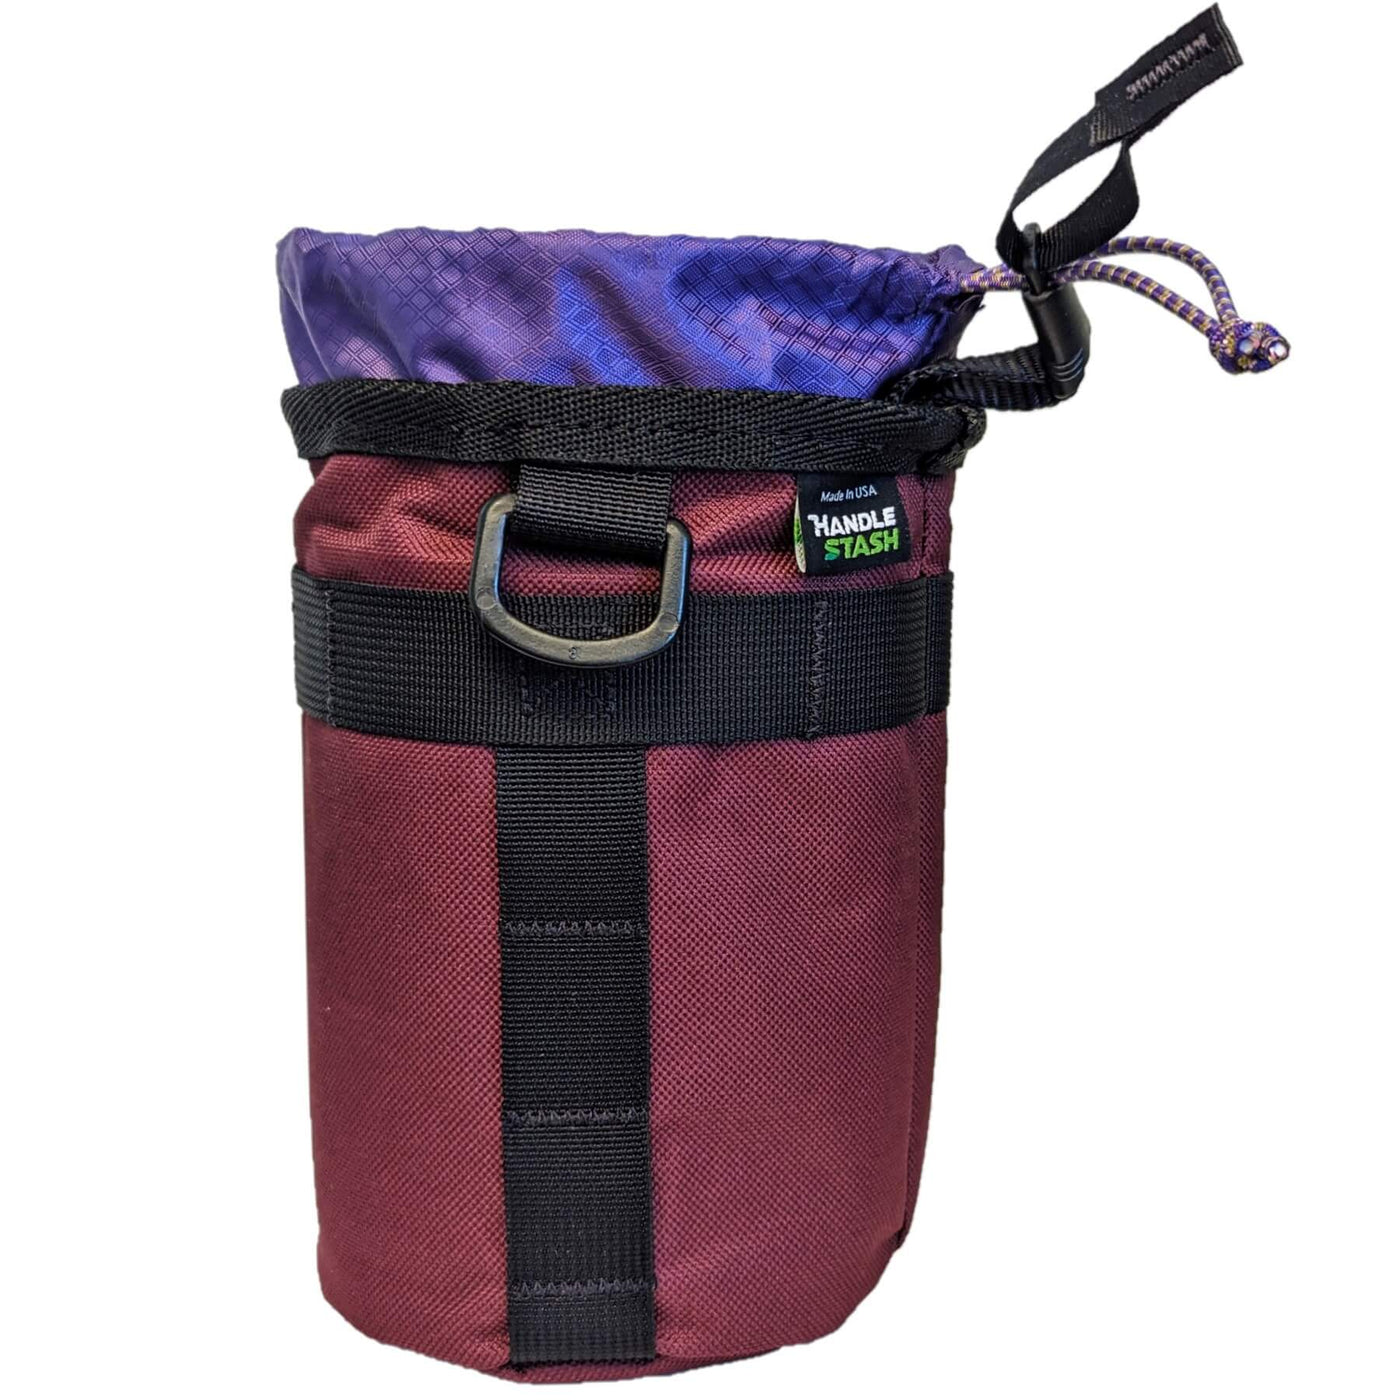 Purple stem bag with one hand open